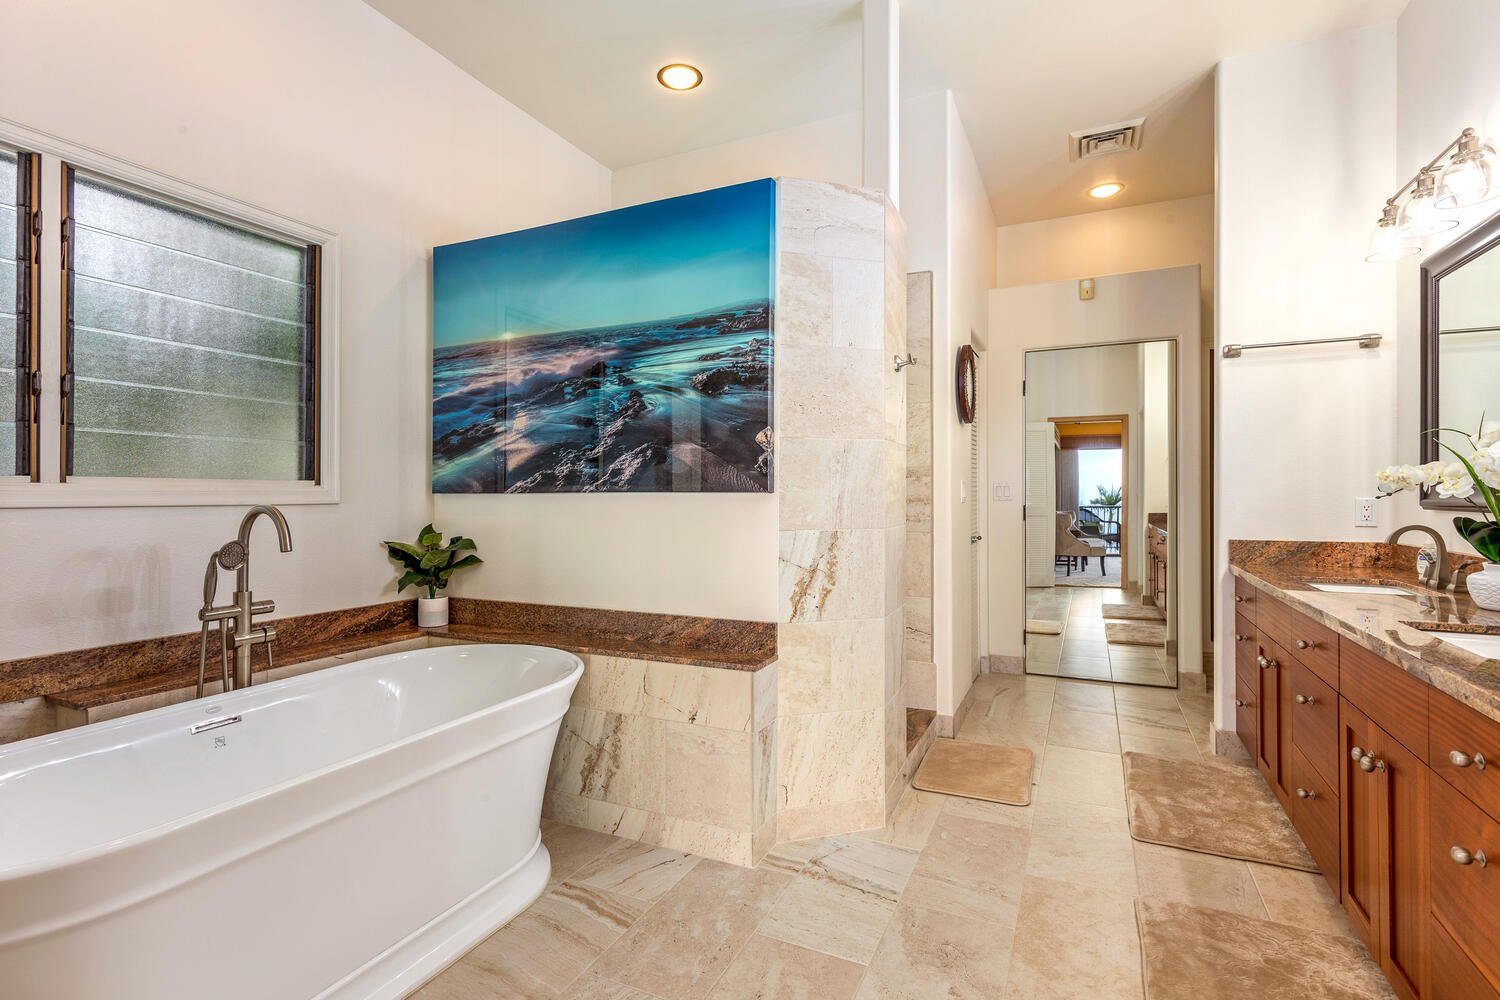 The bathroom has been remodeled to include stone counters and a beautiful architectural bathing tub.